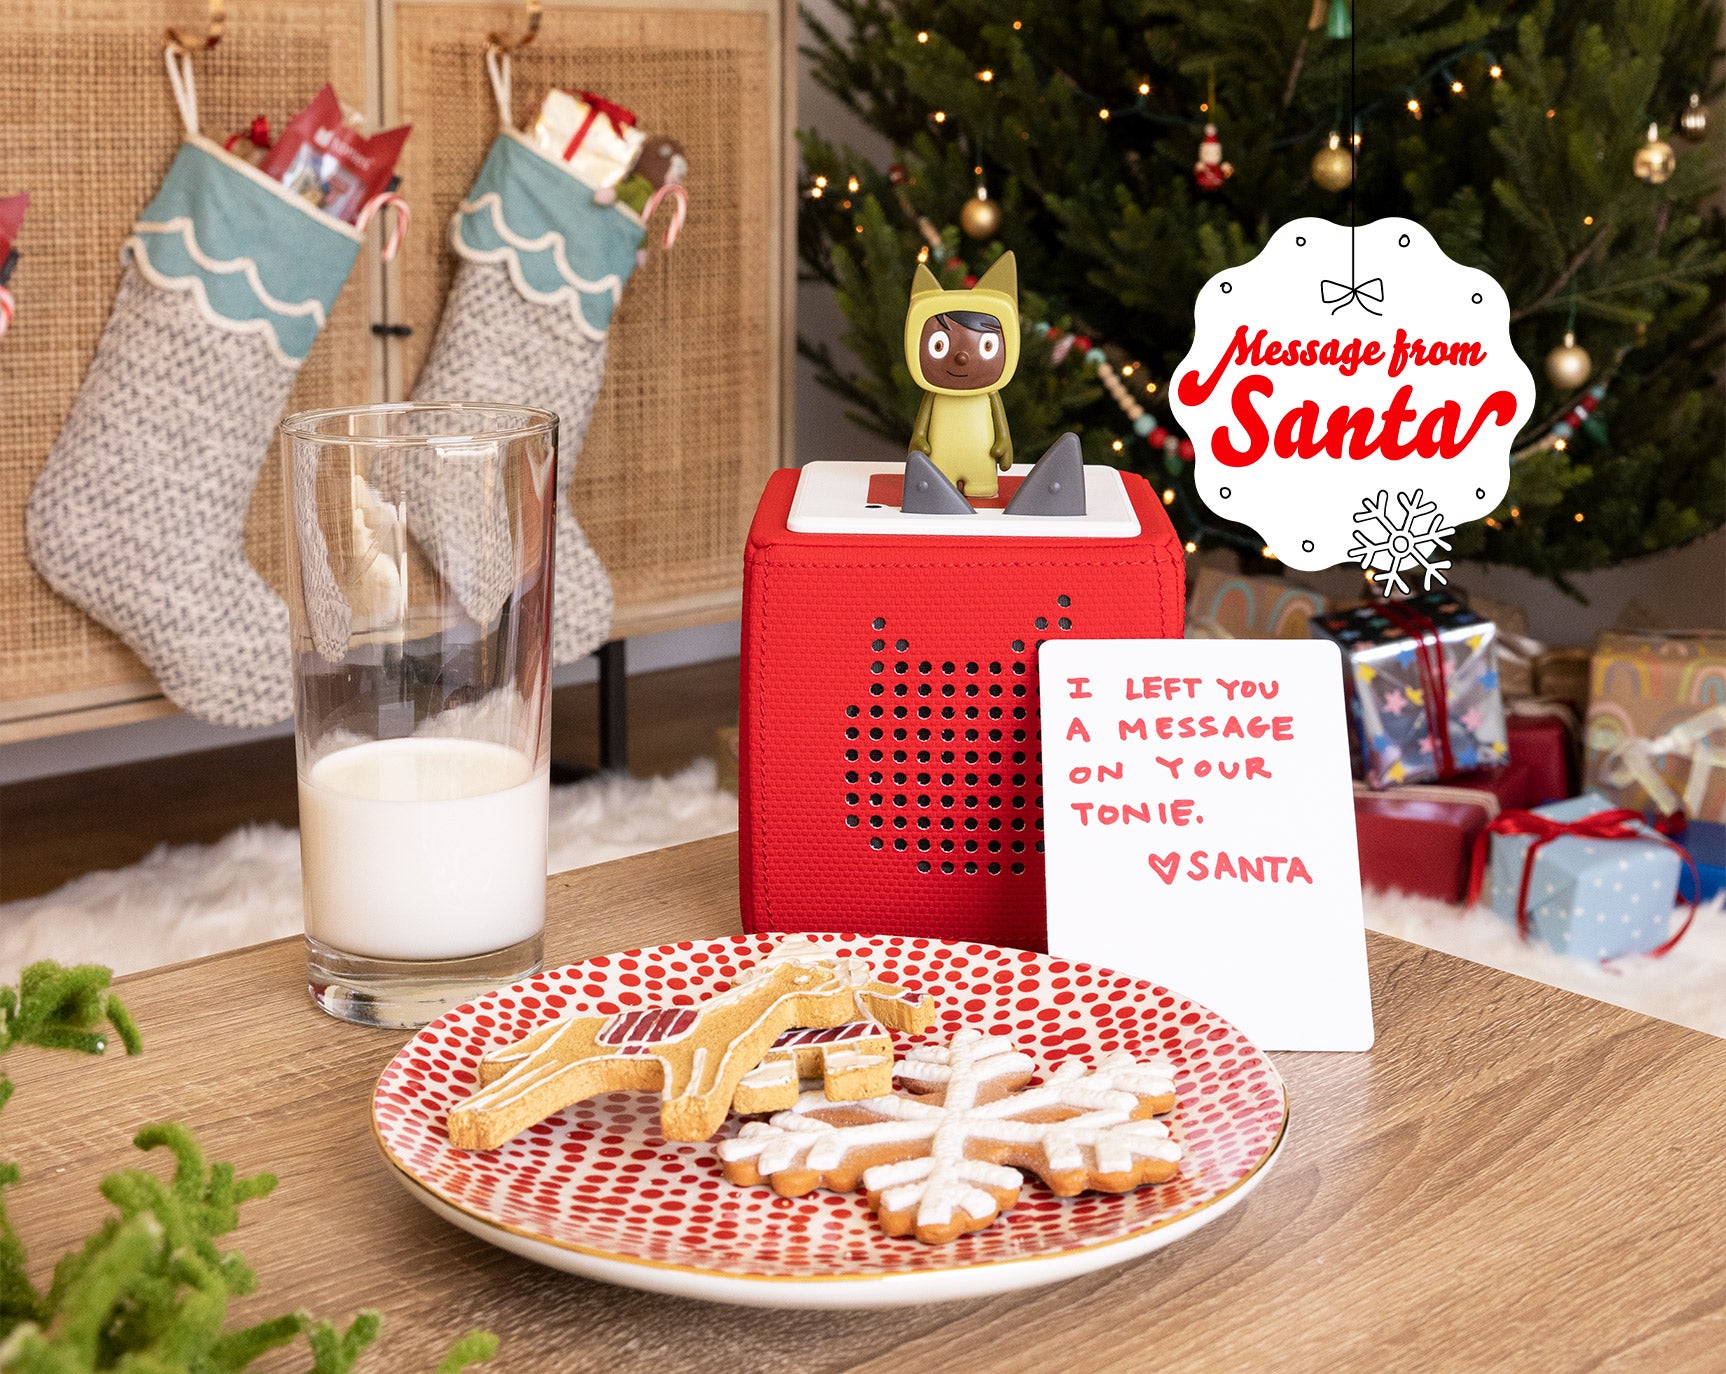 Image of a Creative Tonie and Toniebox with a plate of cookies and a note to Santa.